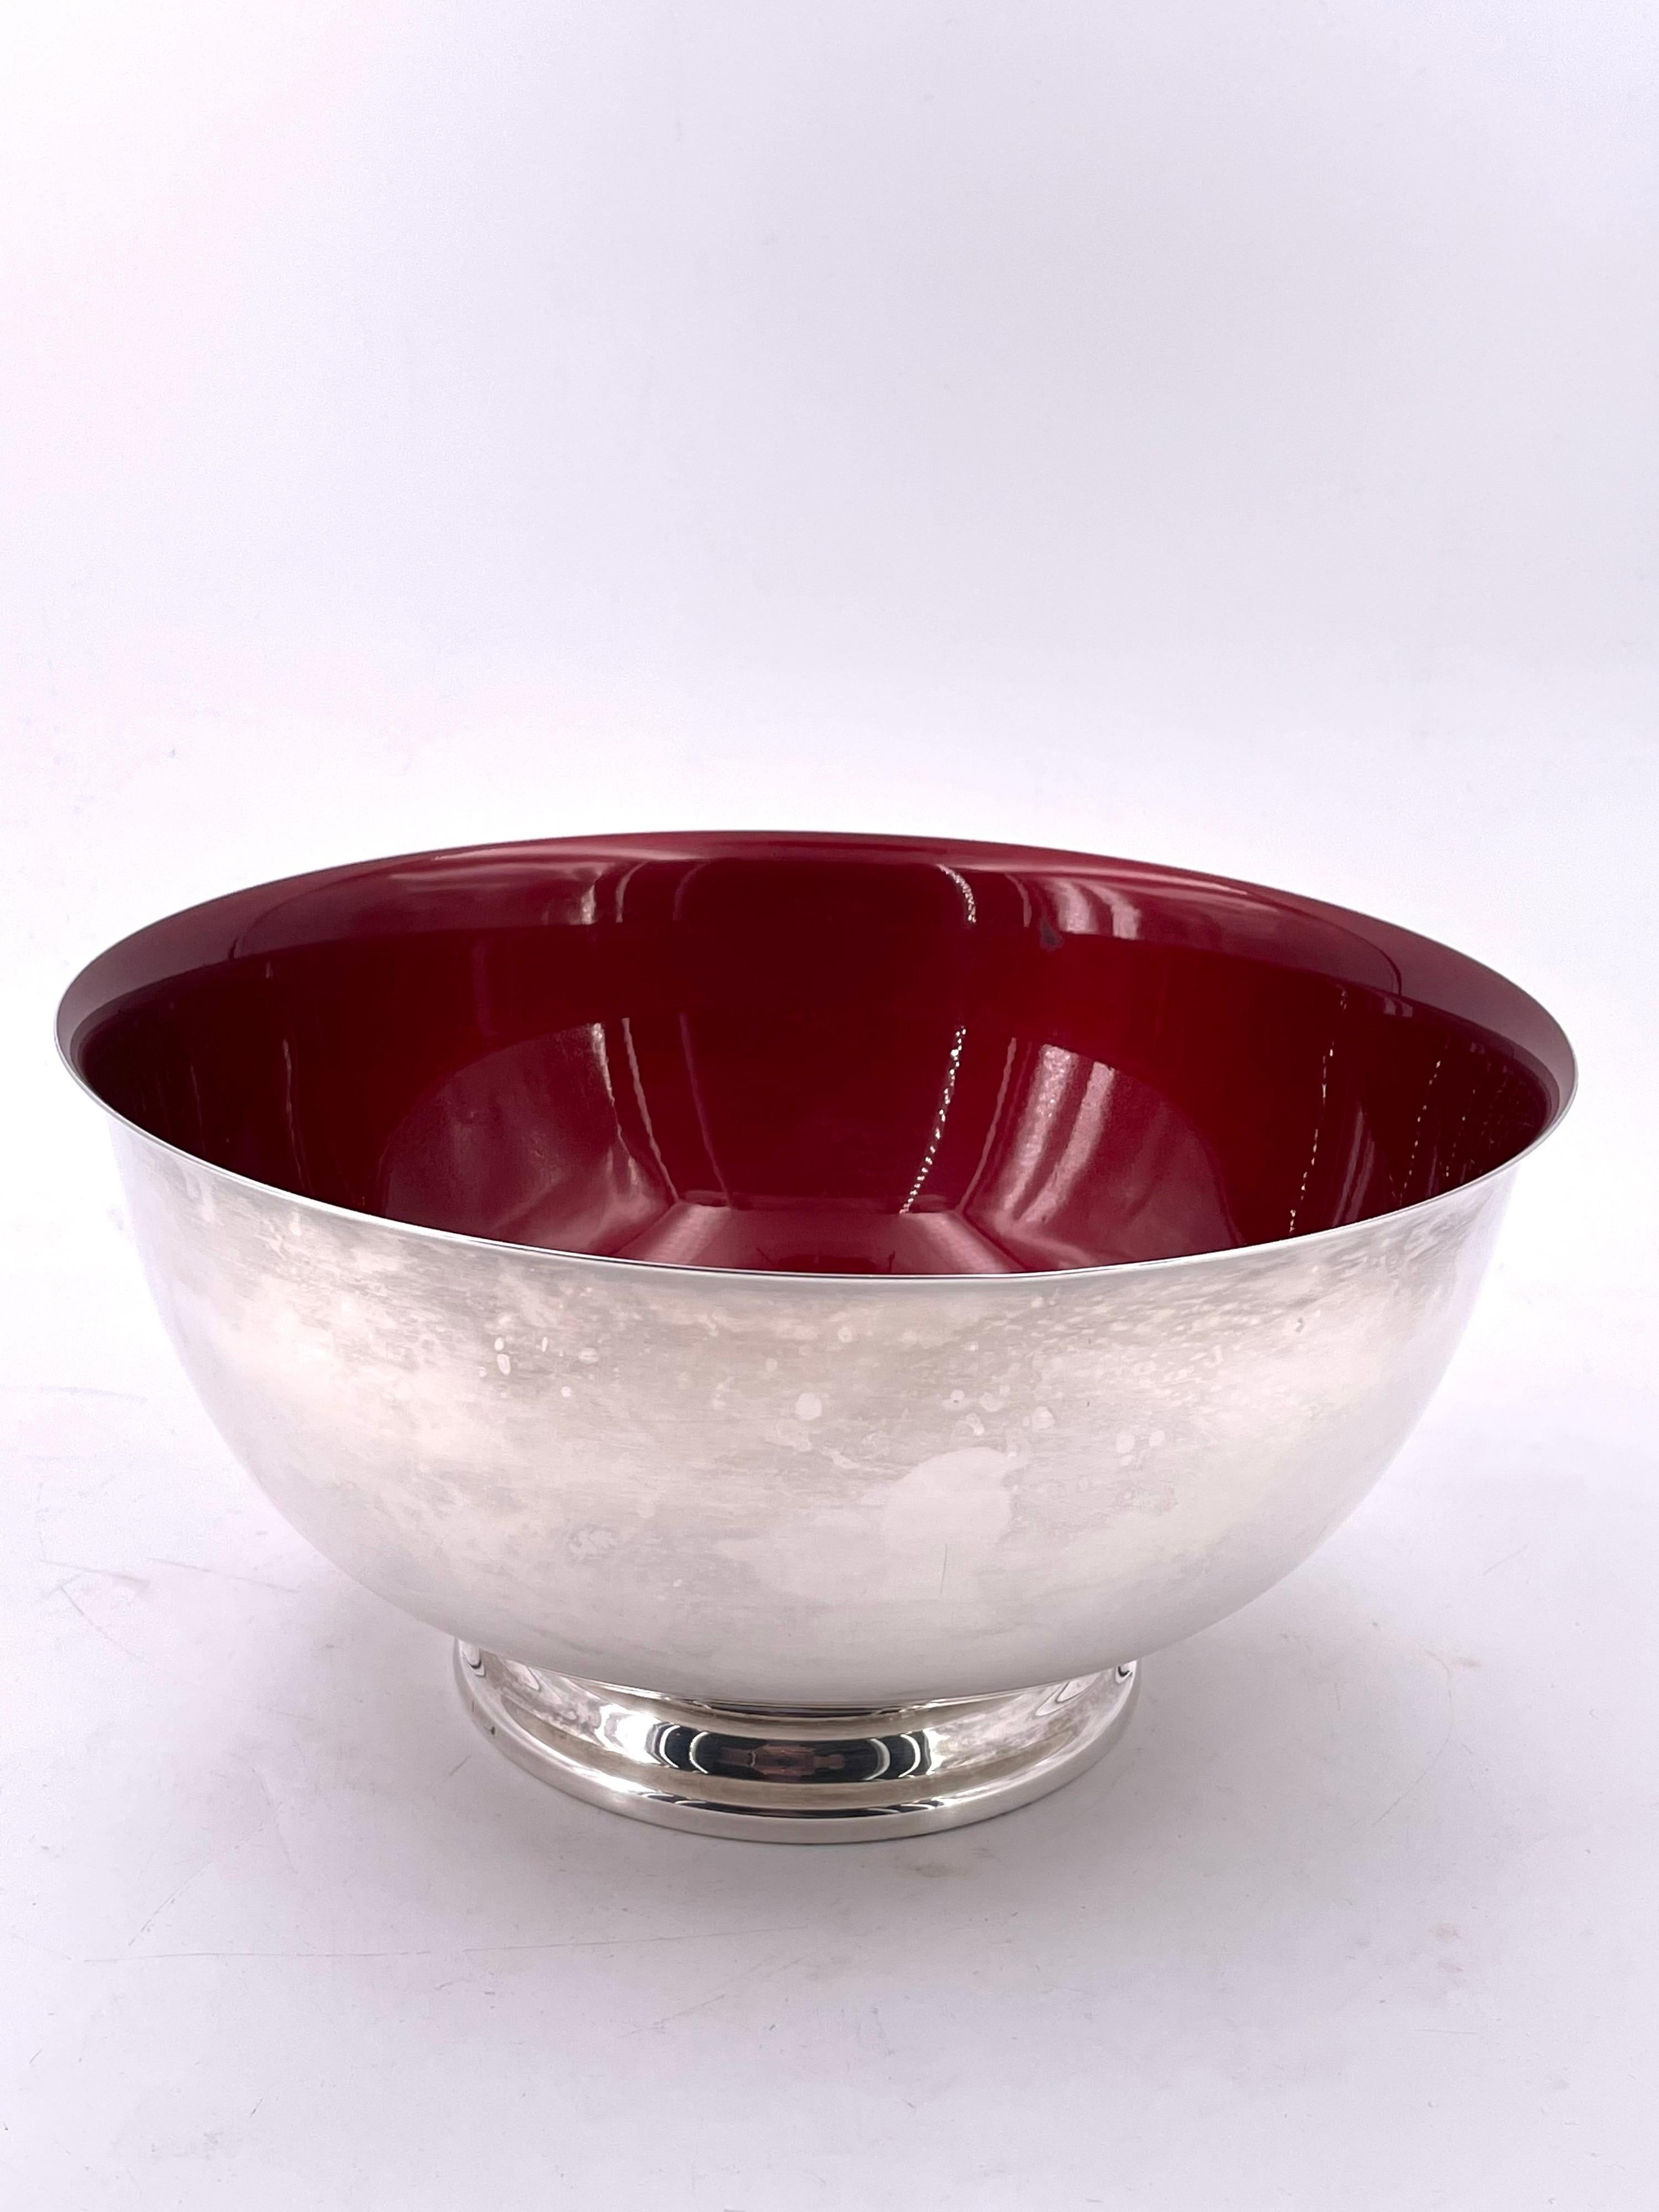 Beautiful design on this large bowl by Reed & Barton red enameled footed bowl, we polished its in very nice and clean condition.